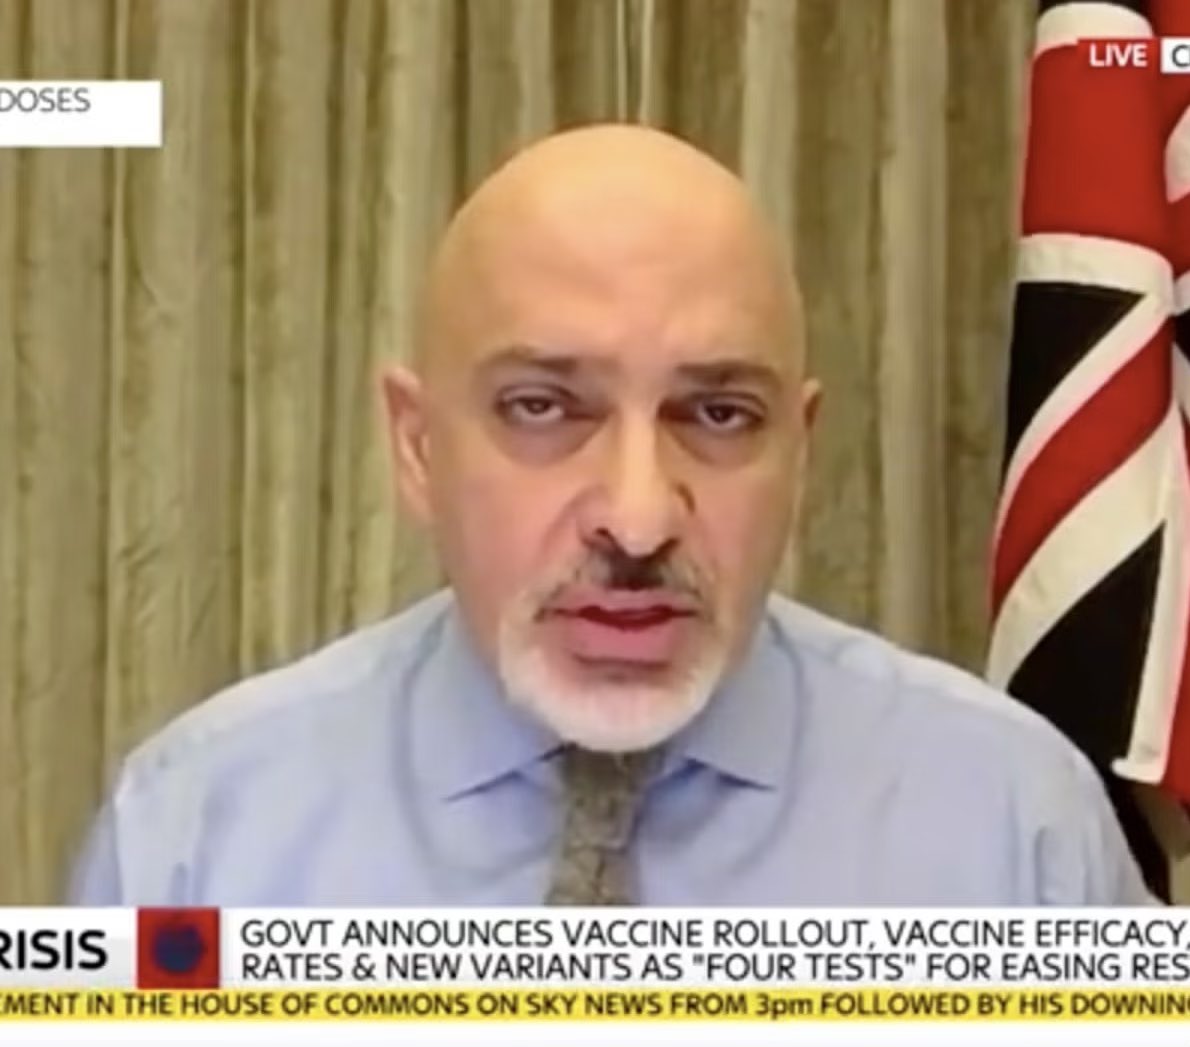 🚨BREAKING: Former UK COVID vaccines minister and chancellor Nadhim Zahawi has announced he will not be standing at the next general election. 

Funny how this is announced after the AstraZeneca vaccine being pulled worldwide because of it causing severe blood clots and